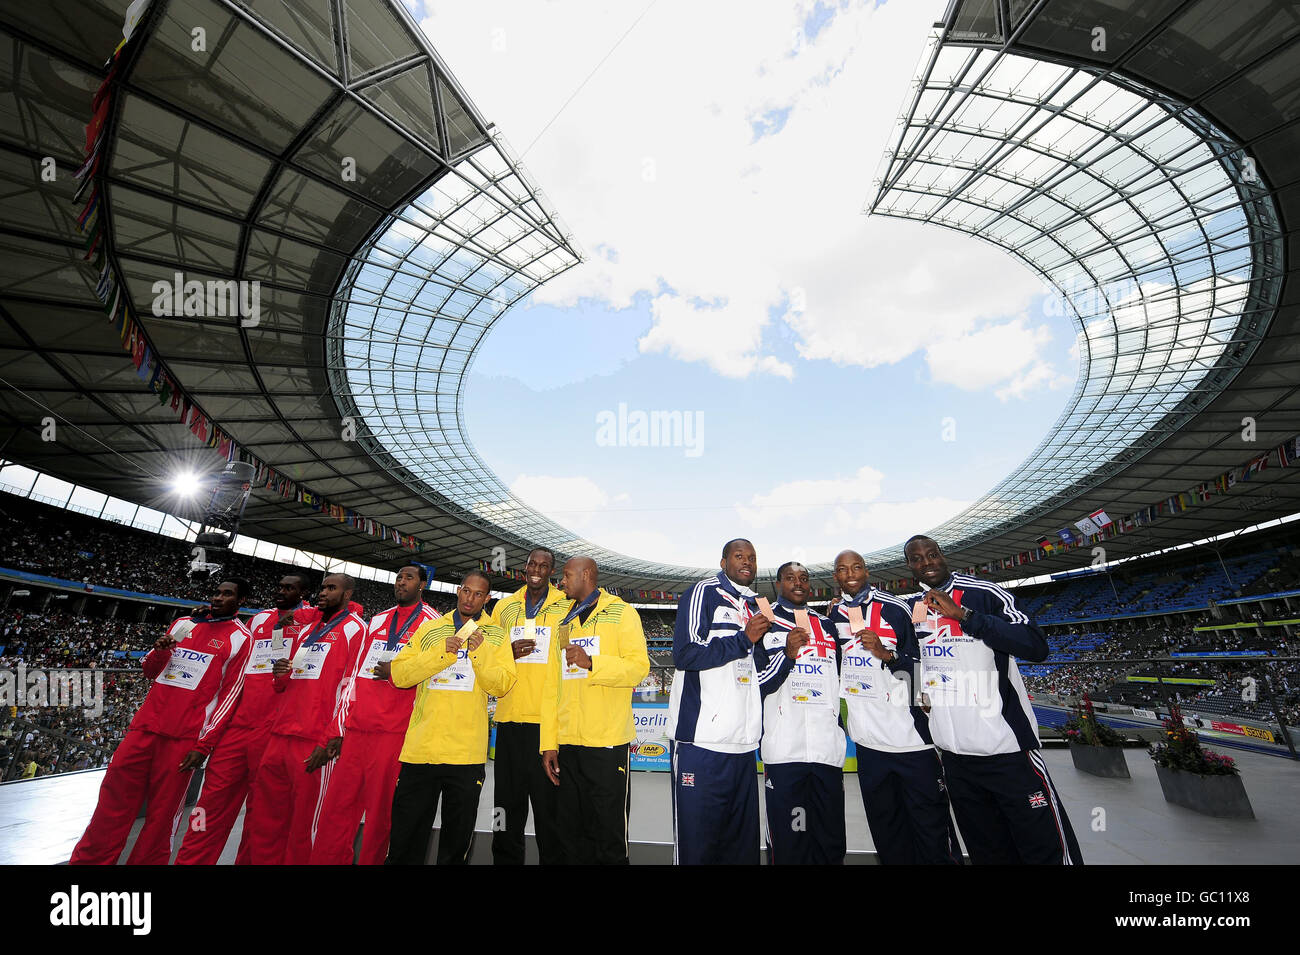 Usain Bolt stands in the middle as the Jamaican relay team collect their Gold Medals from the 4x100 men's relay in which Great Britain (right) took the Bronze medal during the IAAF World Championships at the Olympiastadion, Berlin. Stock Photo